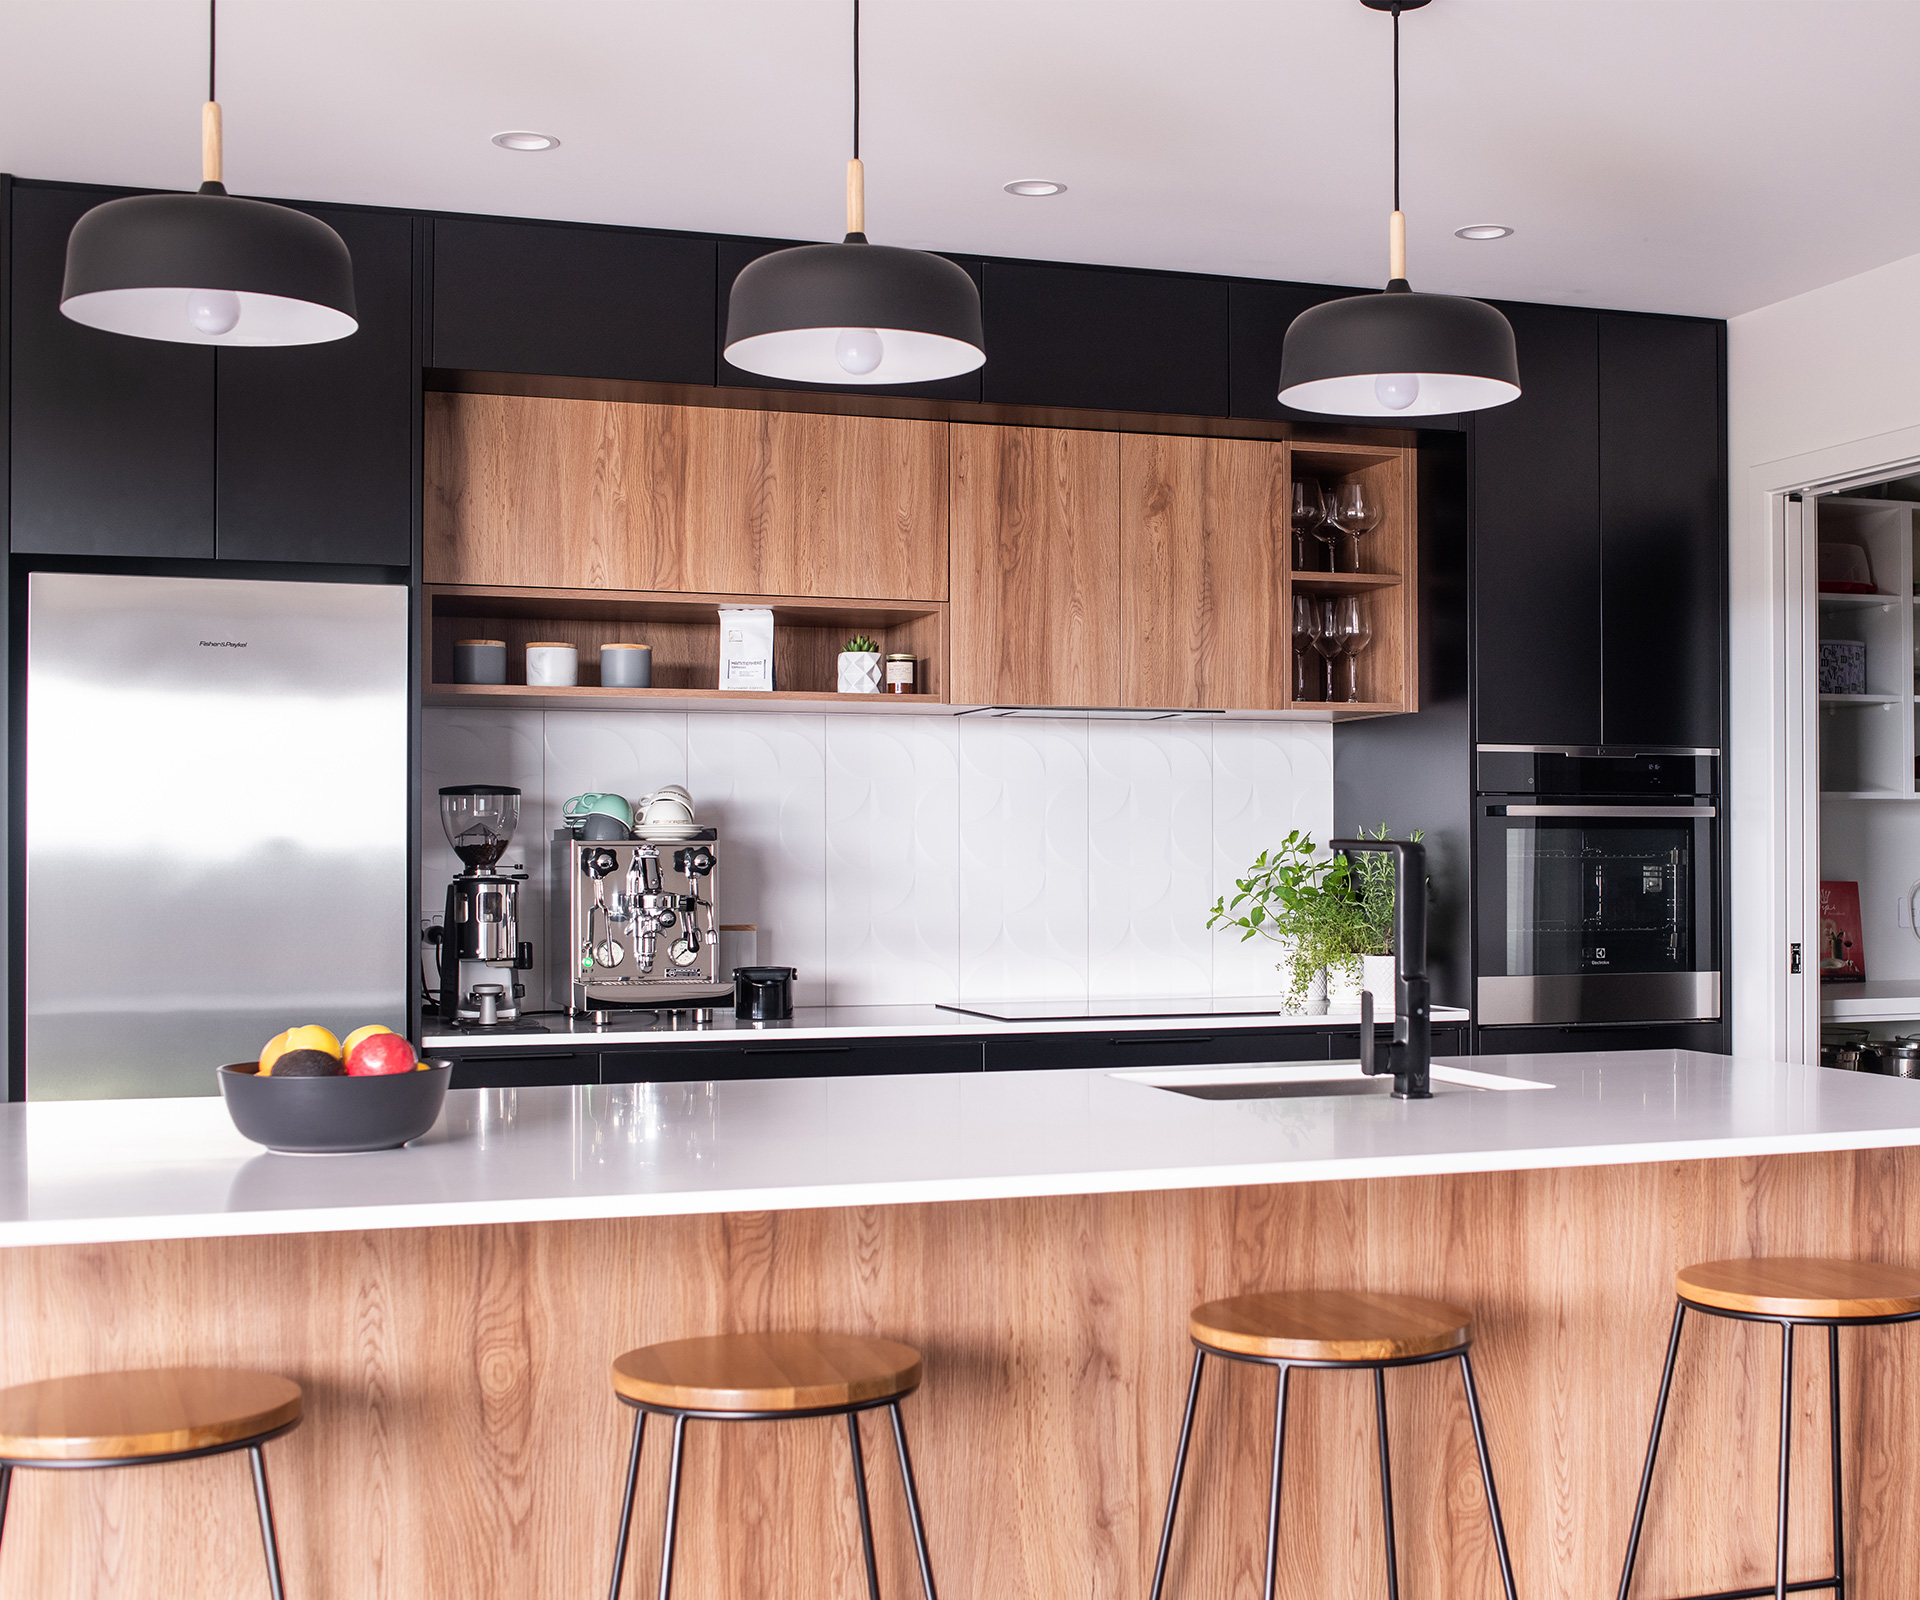 This black and white kitchen was designed for entertaining